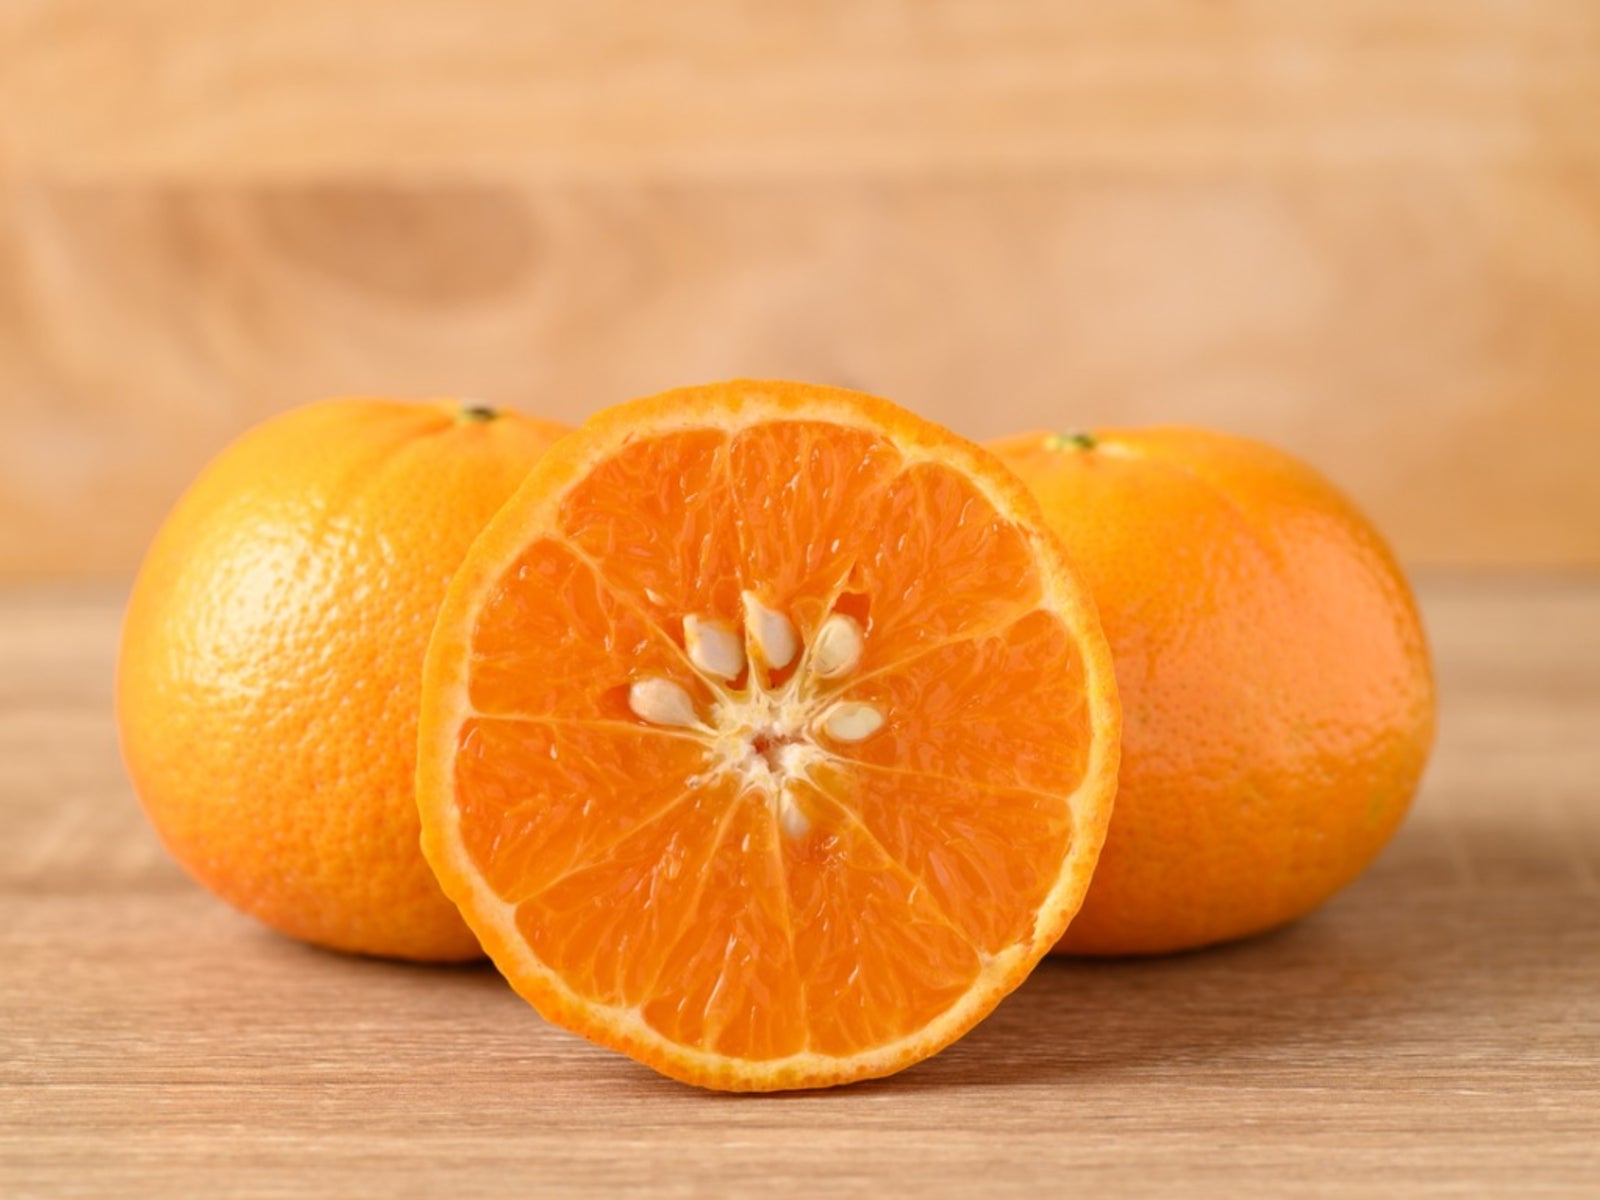 Can You Plant Seeds From An Orange: Grow An Orange Tree From Seeds